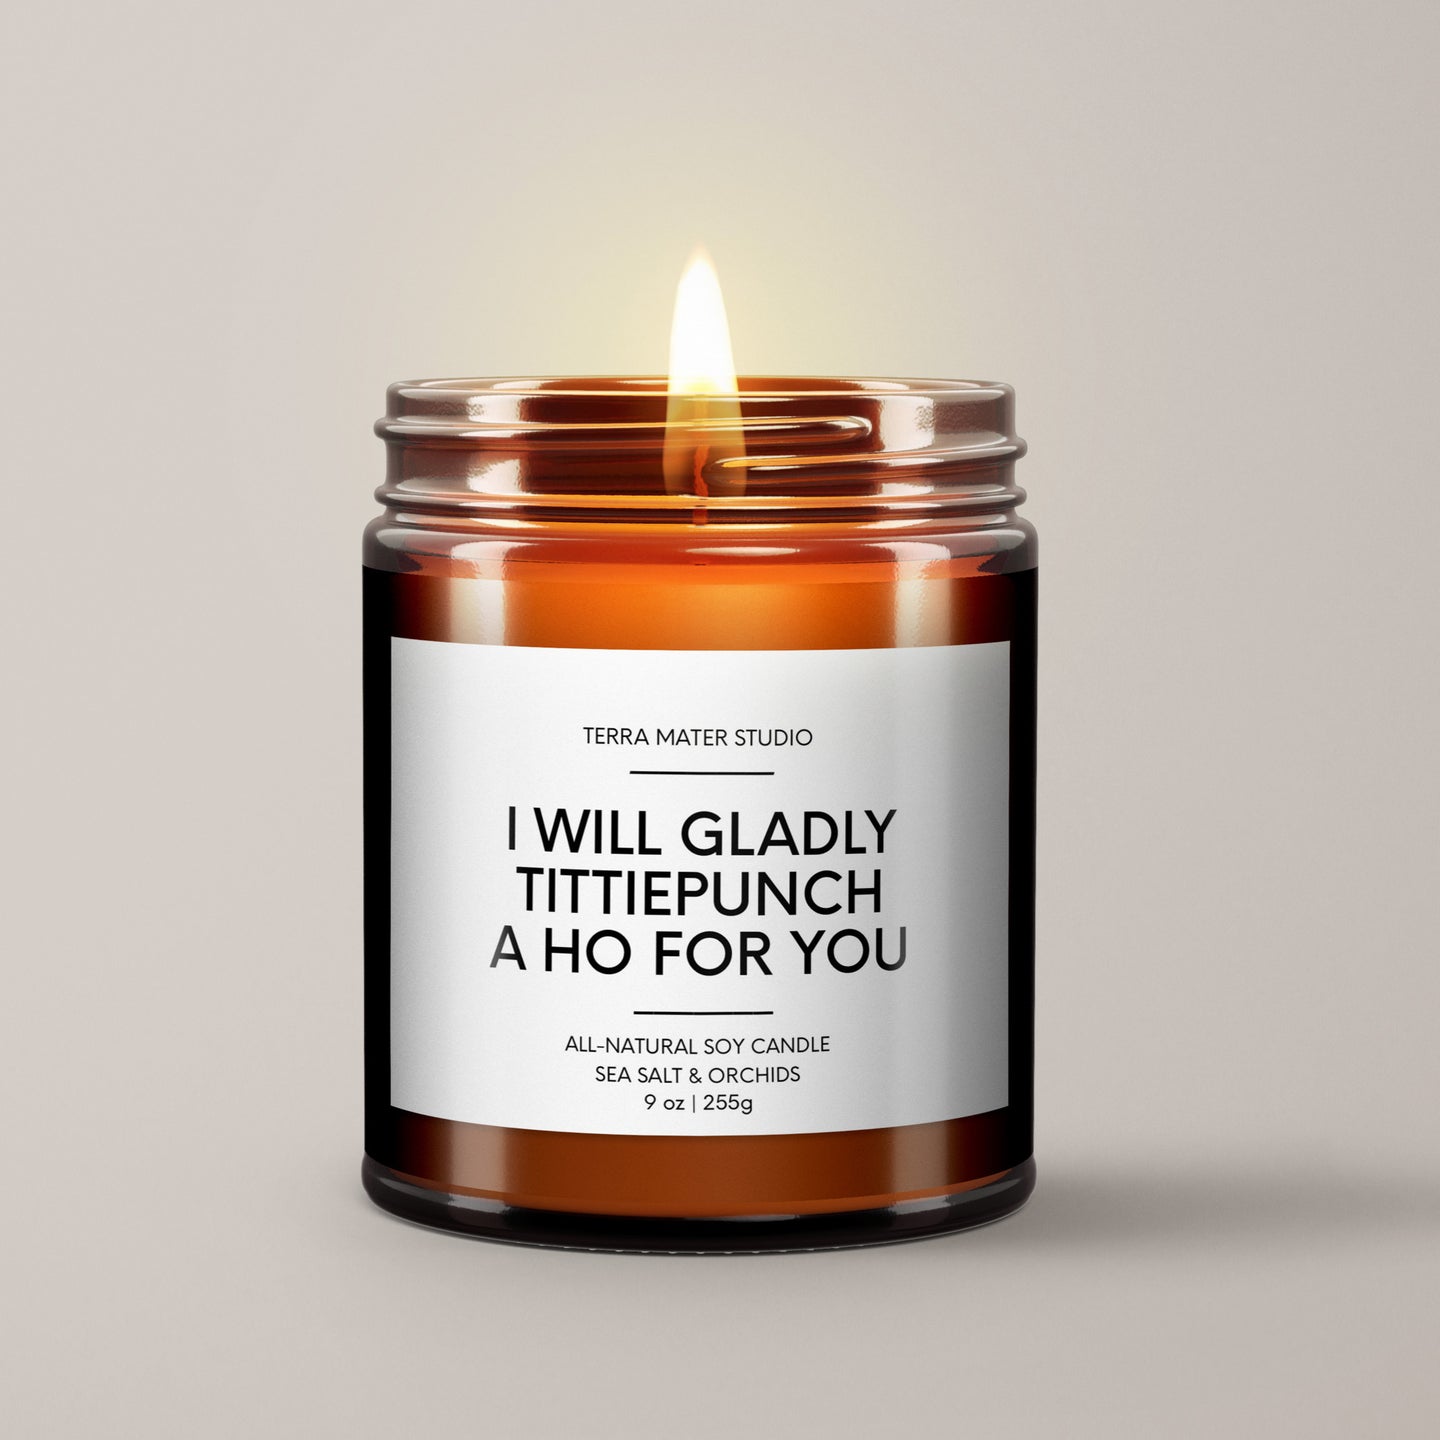 I Will Gladly Tittiepunch A Ho For You Soy Wax Candle | Funny Candles